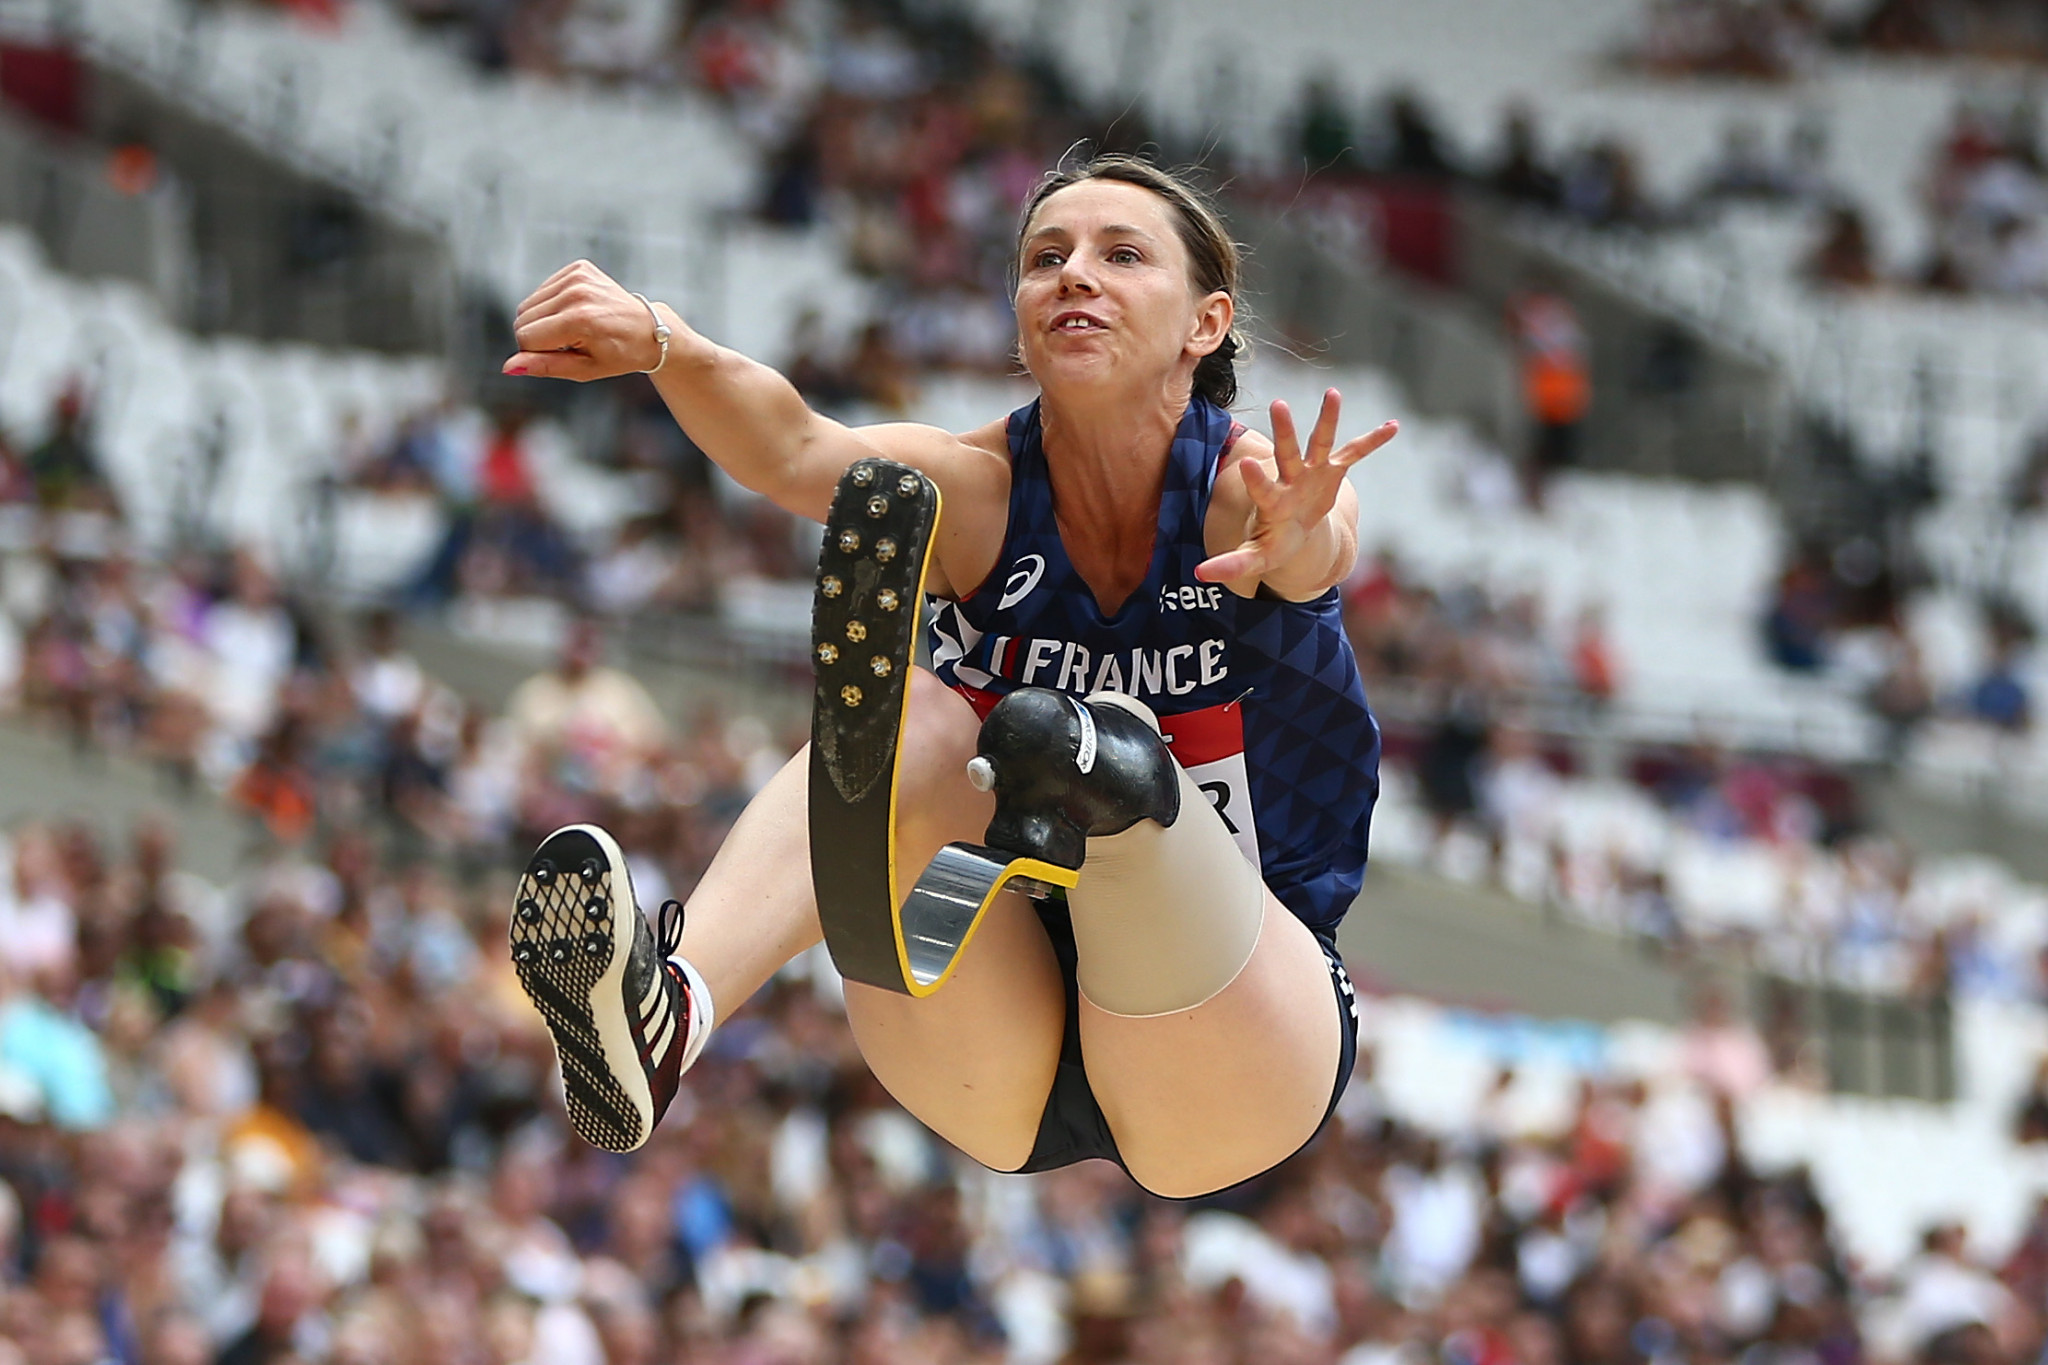 France launches bid to unearth new stars with 2,024 days to go before Paris 2024 Paralympics